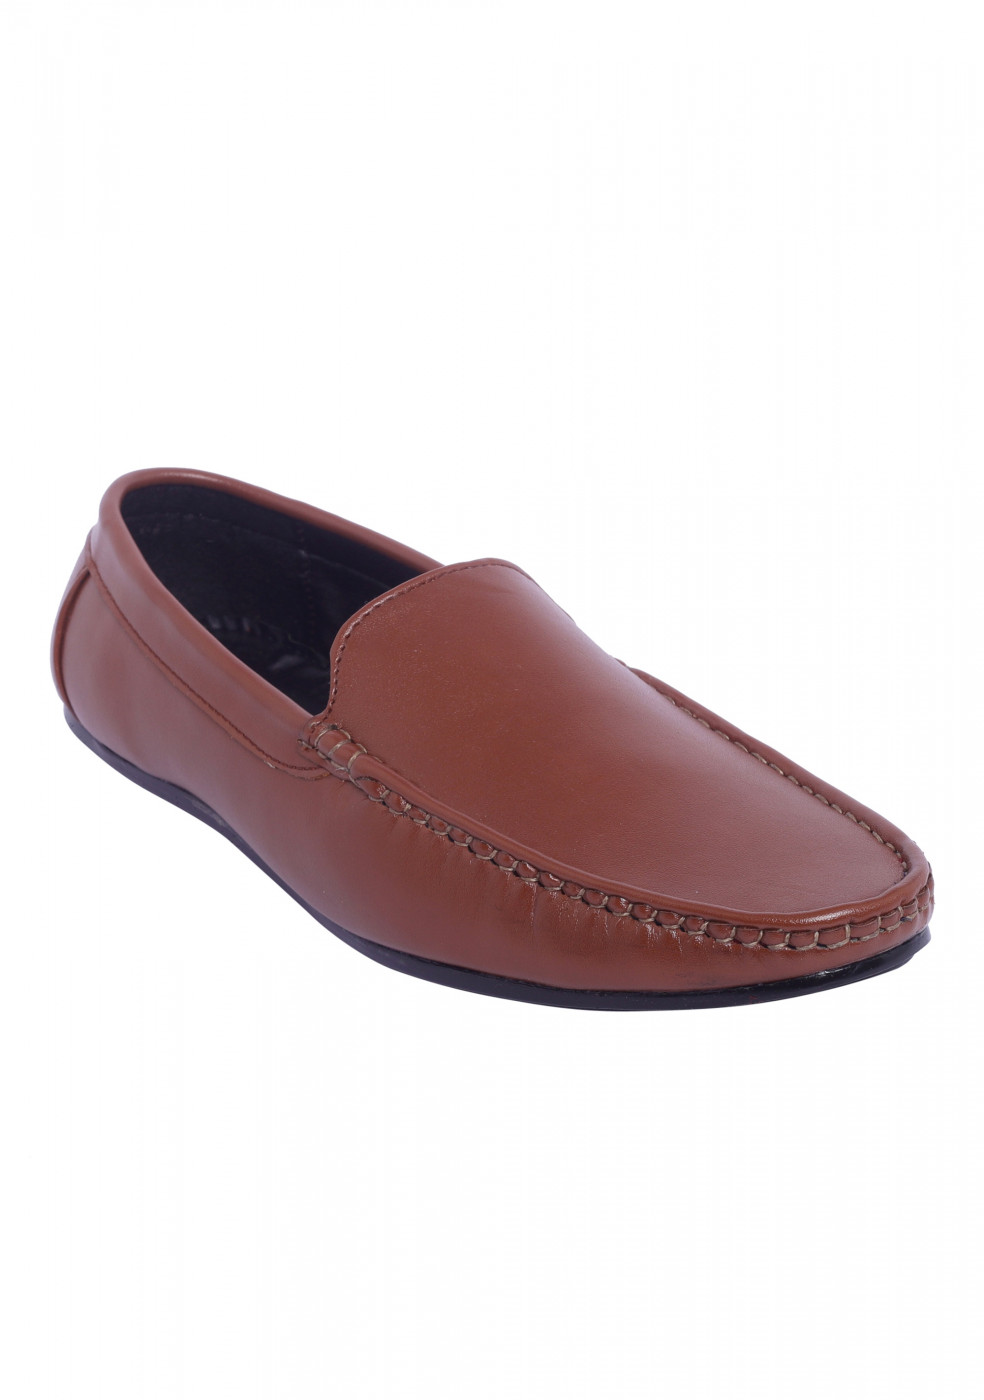 XSTOM Stylish TAN Color Casual Loafers For Men